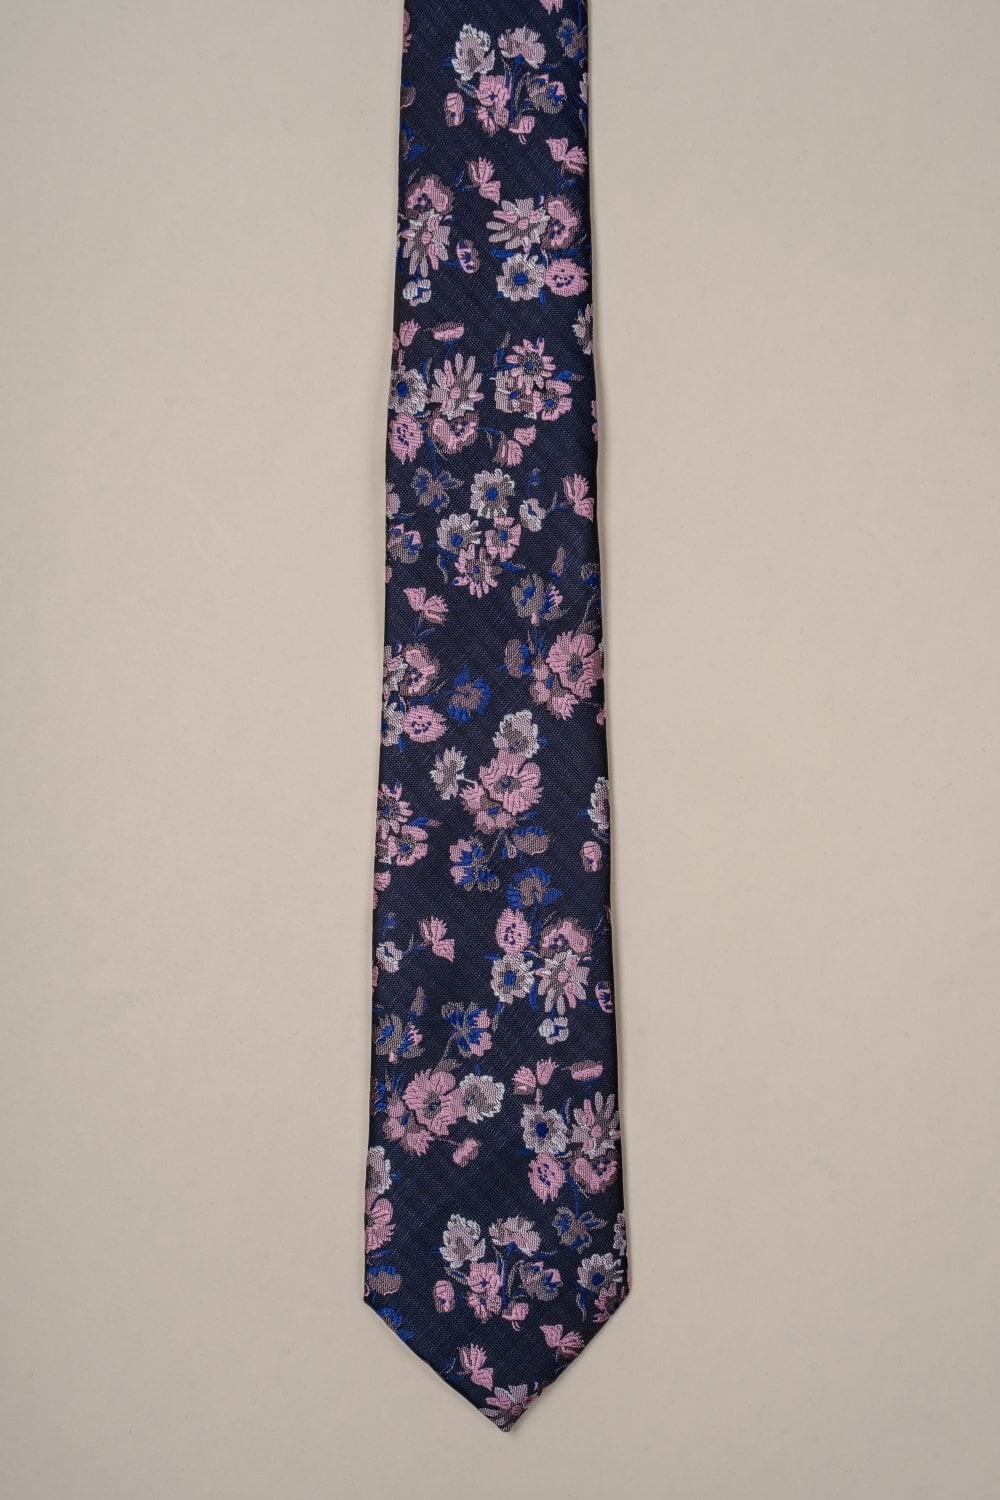 Men's Floral Patterned Tie  - Navy and Pink